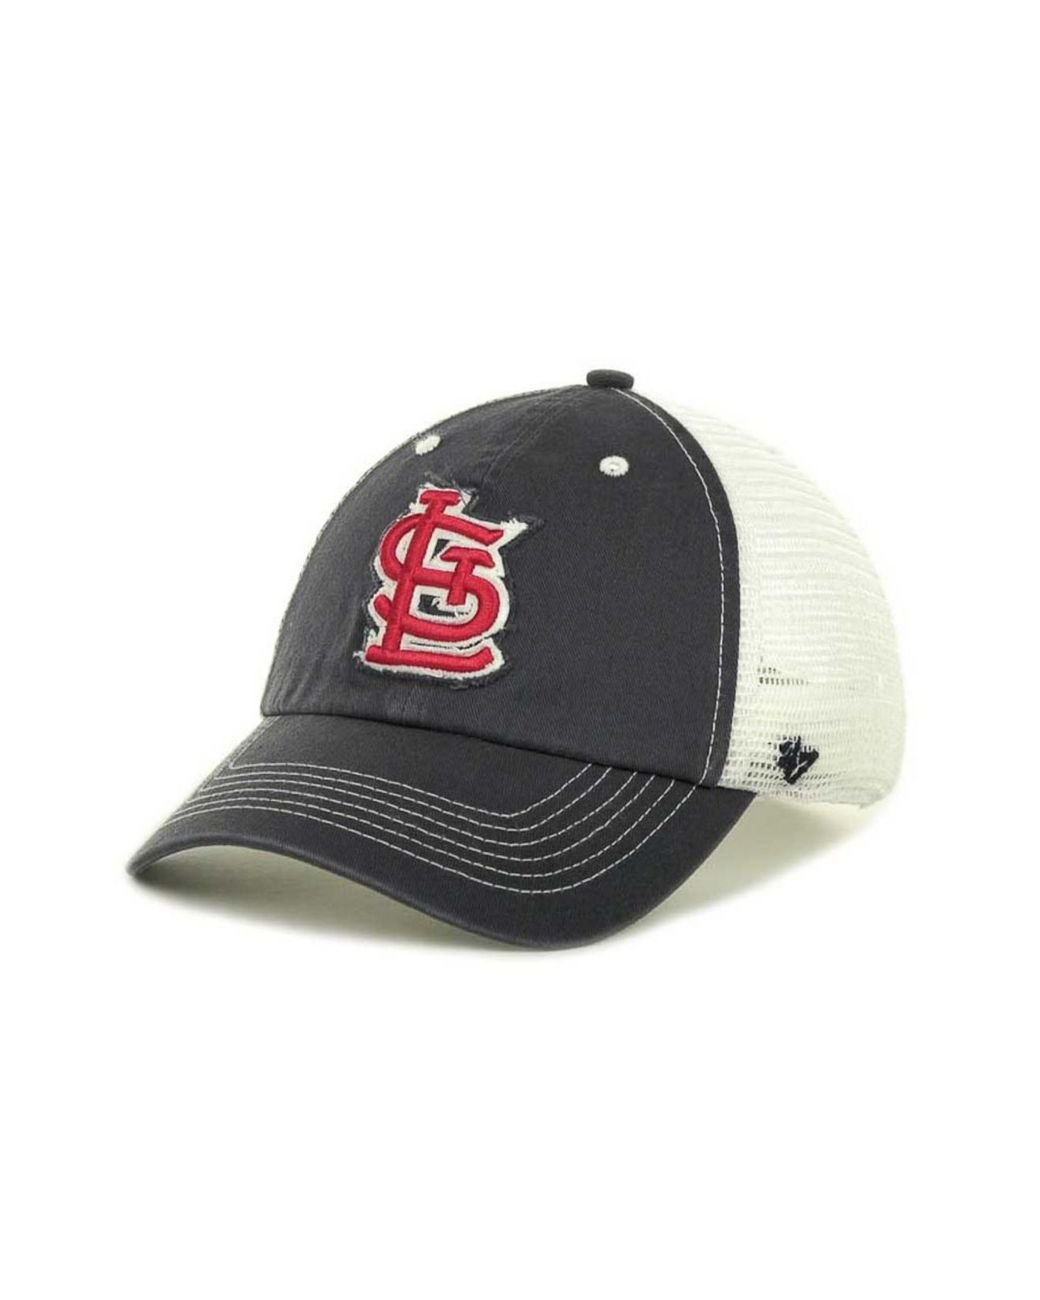 St. Louis Cardinals '47 Logo Cooperstown Collection Clean Up Adjustable Hat  - Light Blue